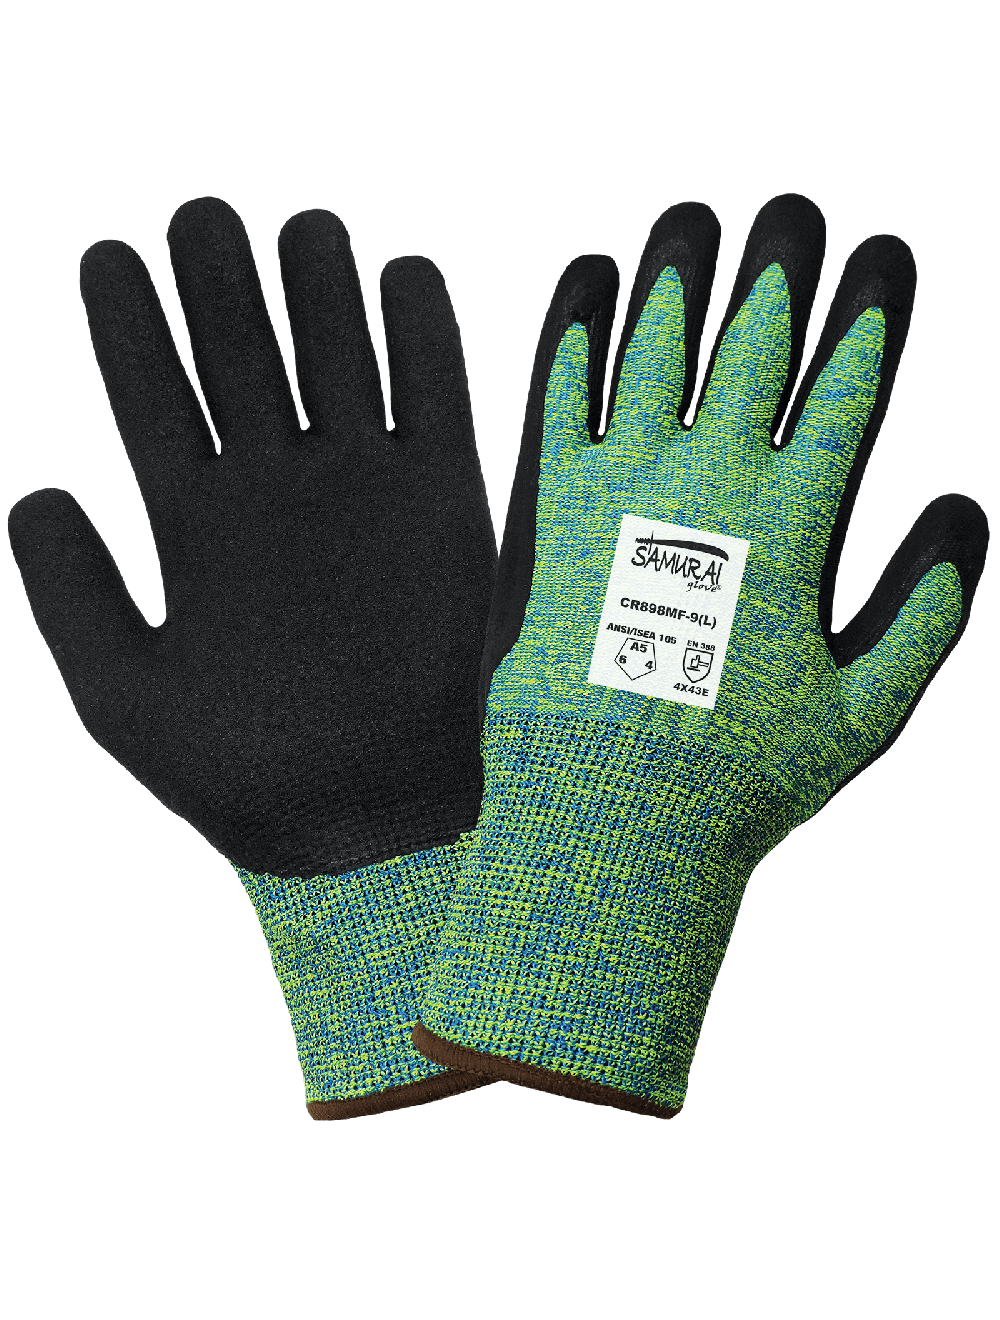 Samurai Glove® Cut, Abrasion, and Puncture Resistant Anti-Static/Electrostatic Compliant Gloves with a Double-Dipped Nitrile Coating - CR898MF